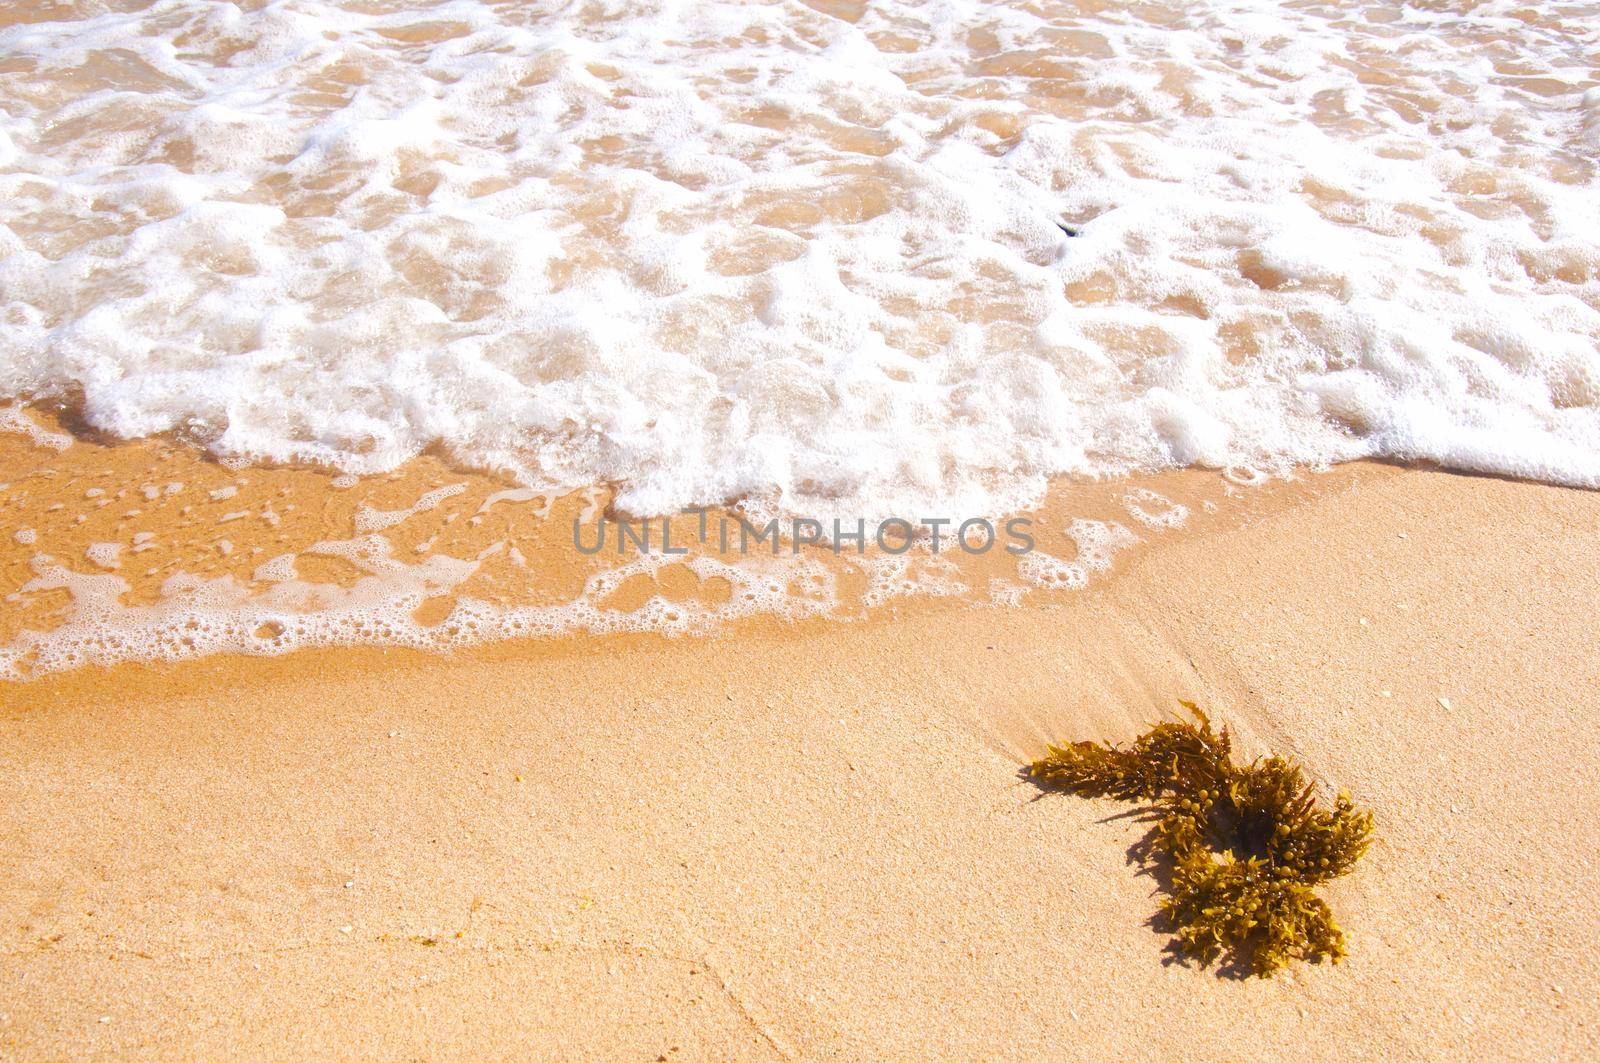 Brown seaweed and waves on the ocean shore, summer, Portugal